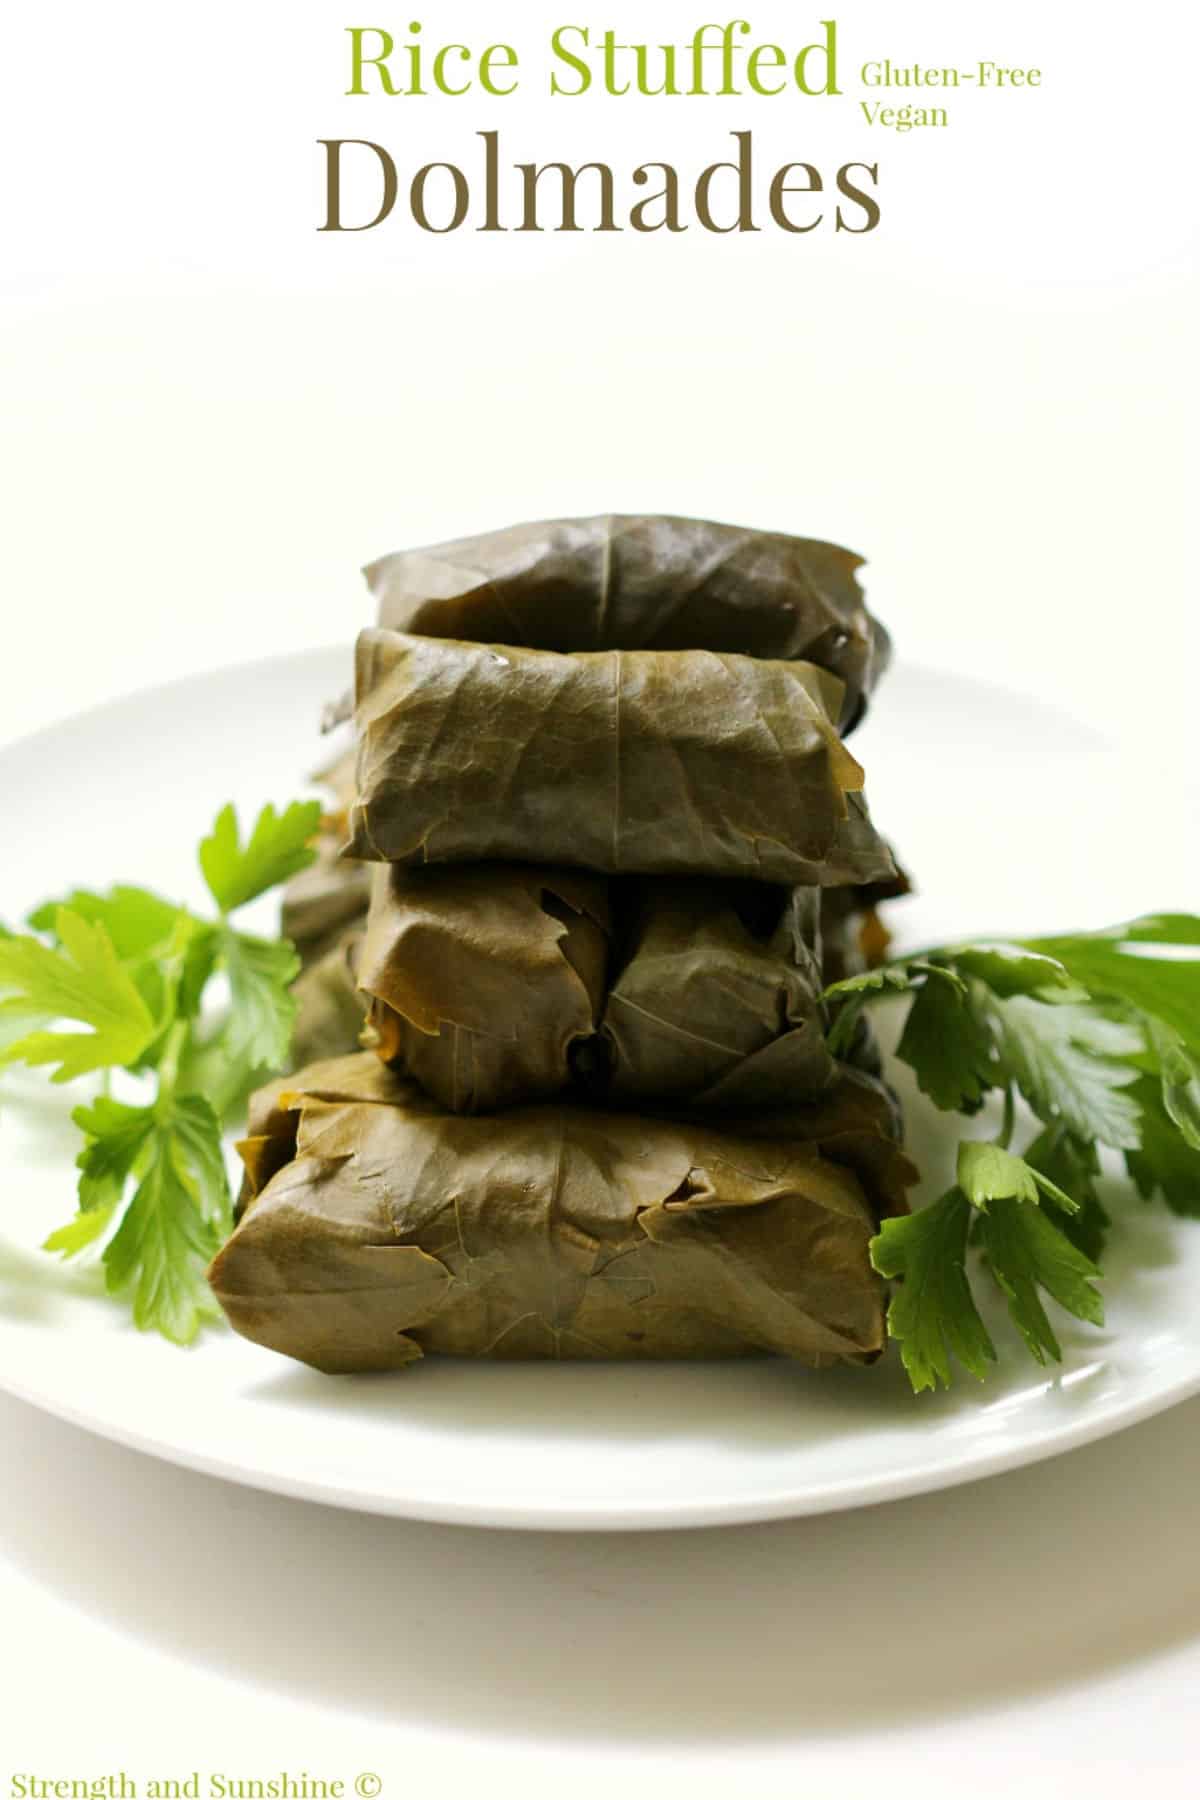 A stack of rice stuffed dolmades on a plate.